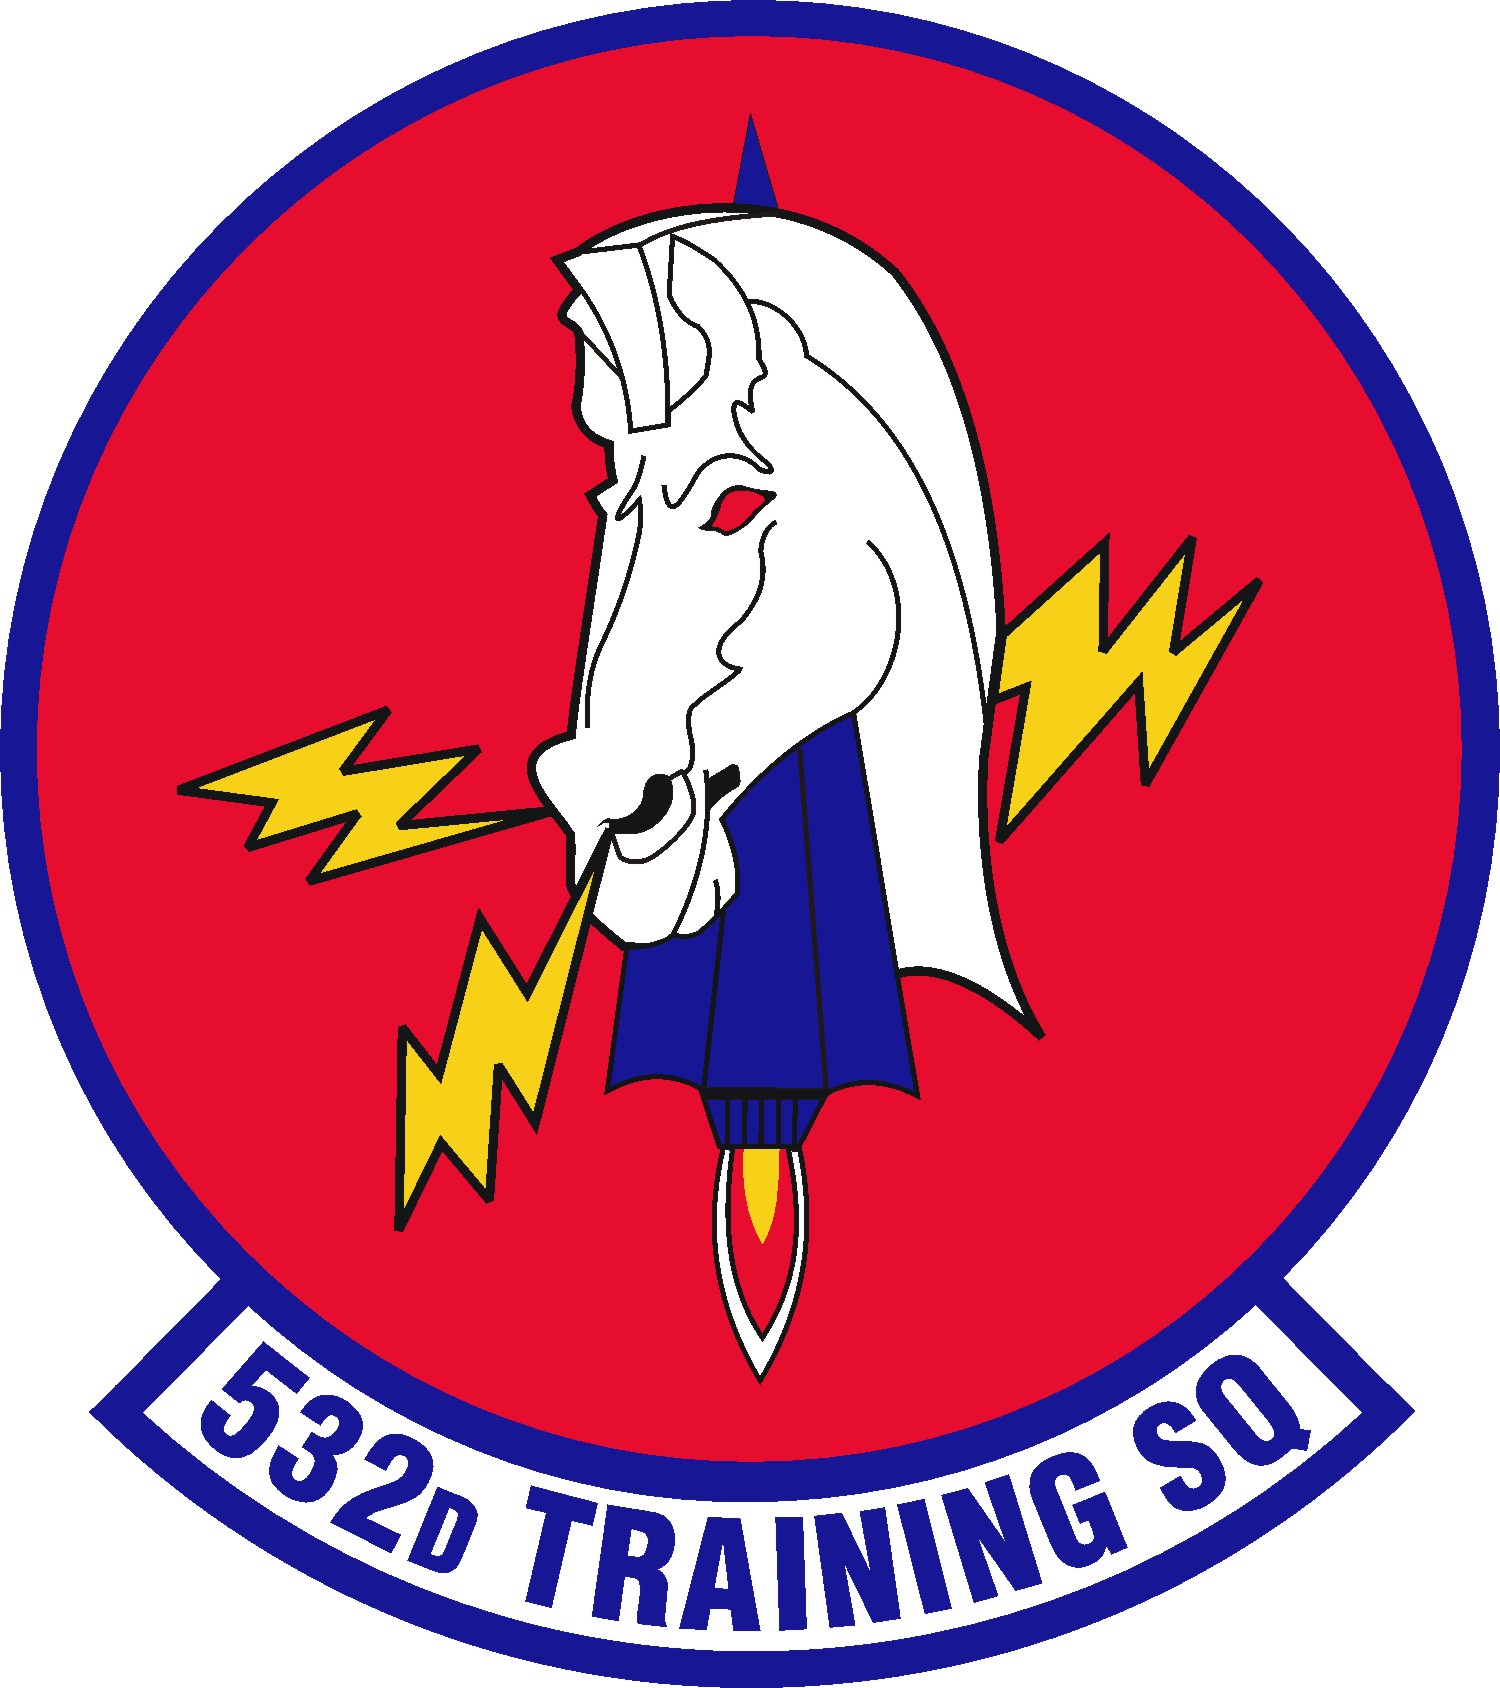 532-training-squadron-aetc-air-force-historical-research-agency